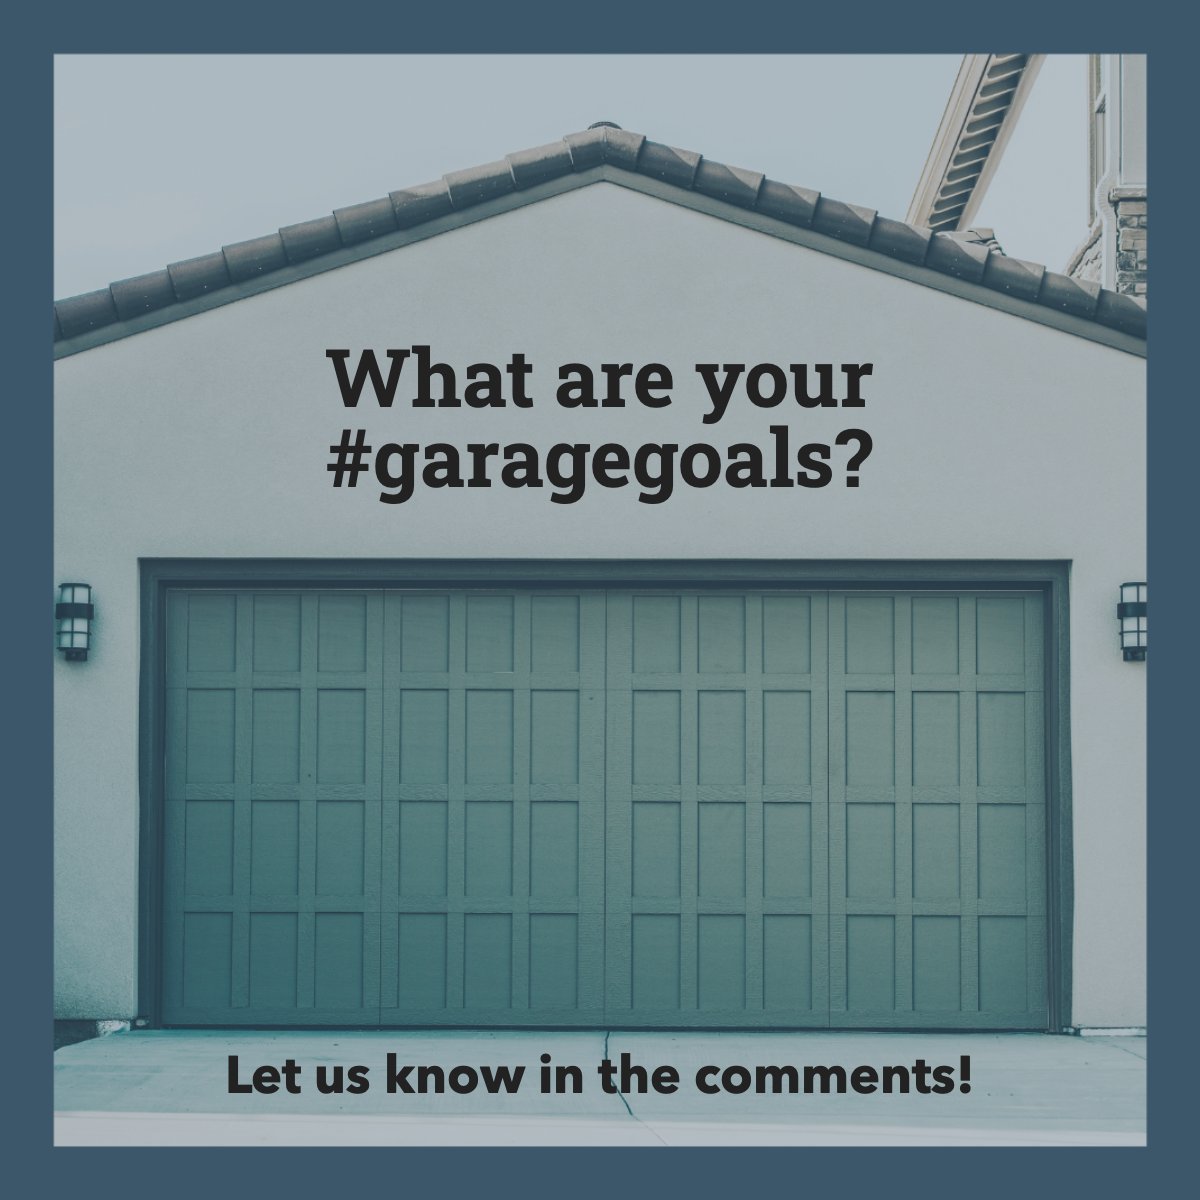 Tell us what your garage goals are in the comments! 👇

#garagegoals    #mygarage    #dreamgarage    #futuregaragegoals
#mattmorano #realestate #realtor #mooresville #lakenorman #realty #houses #homes #charlotte #home #realtyonegroup